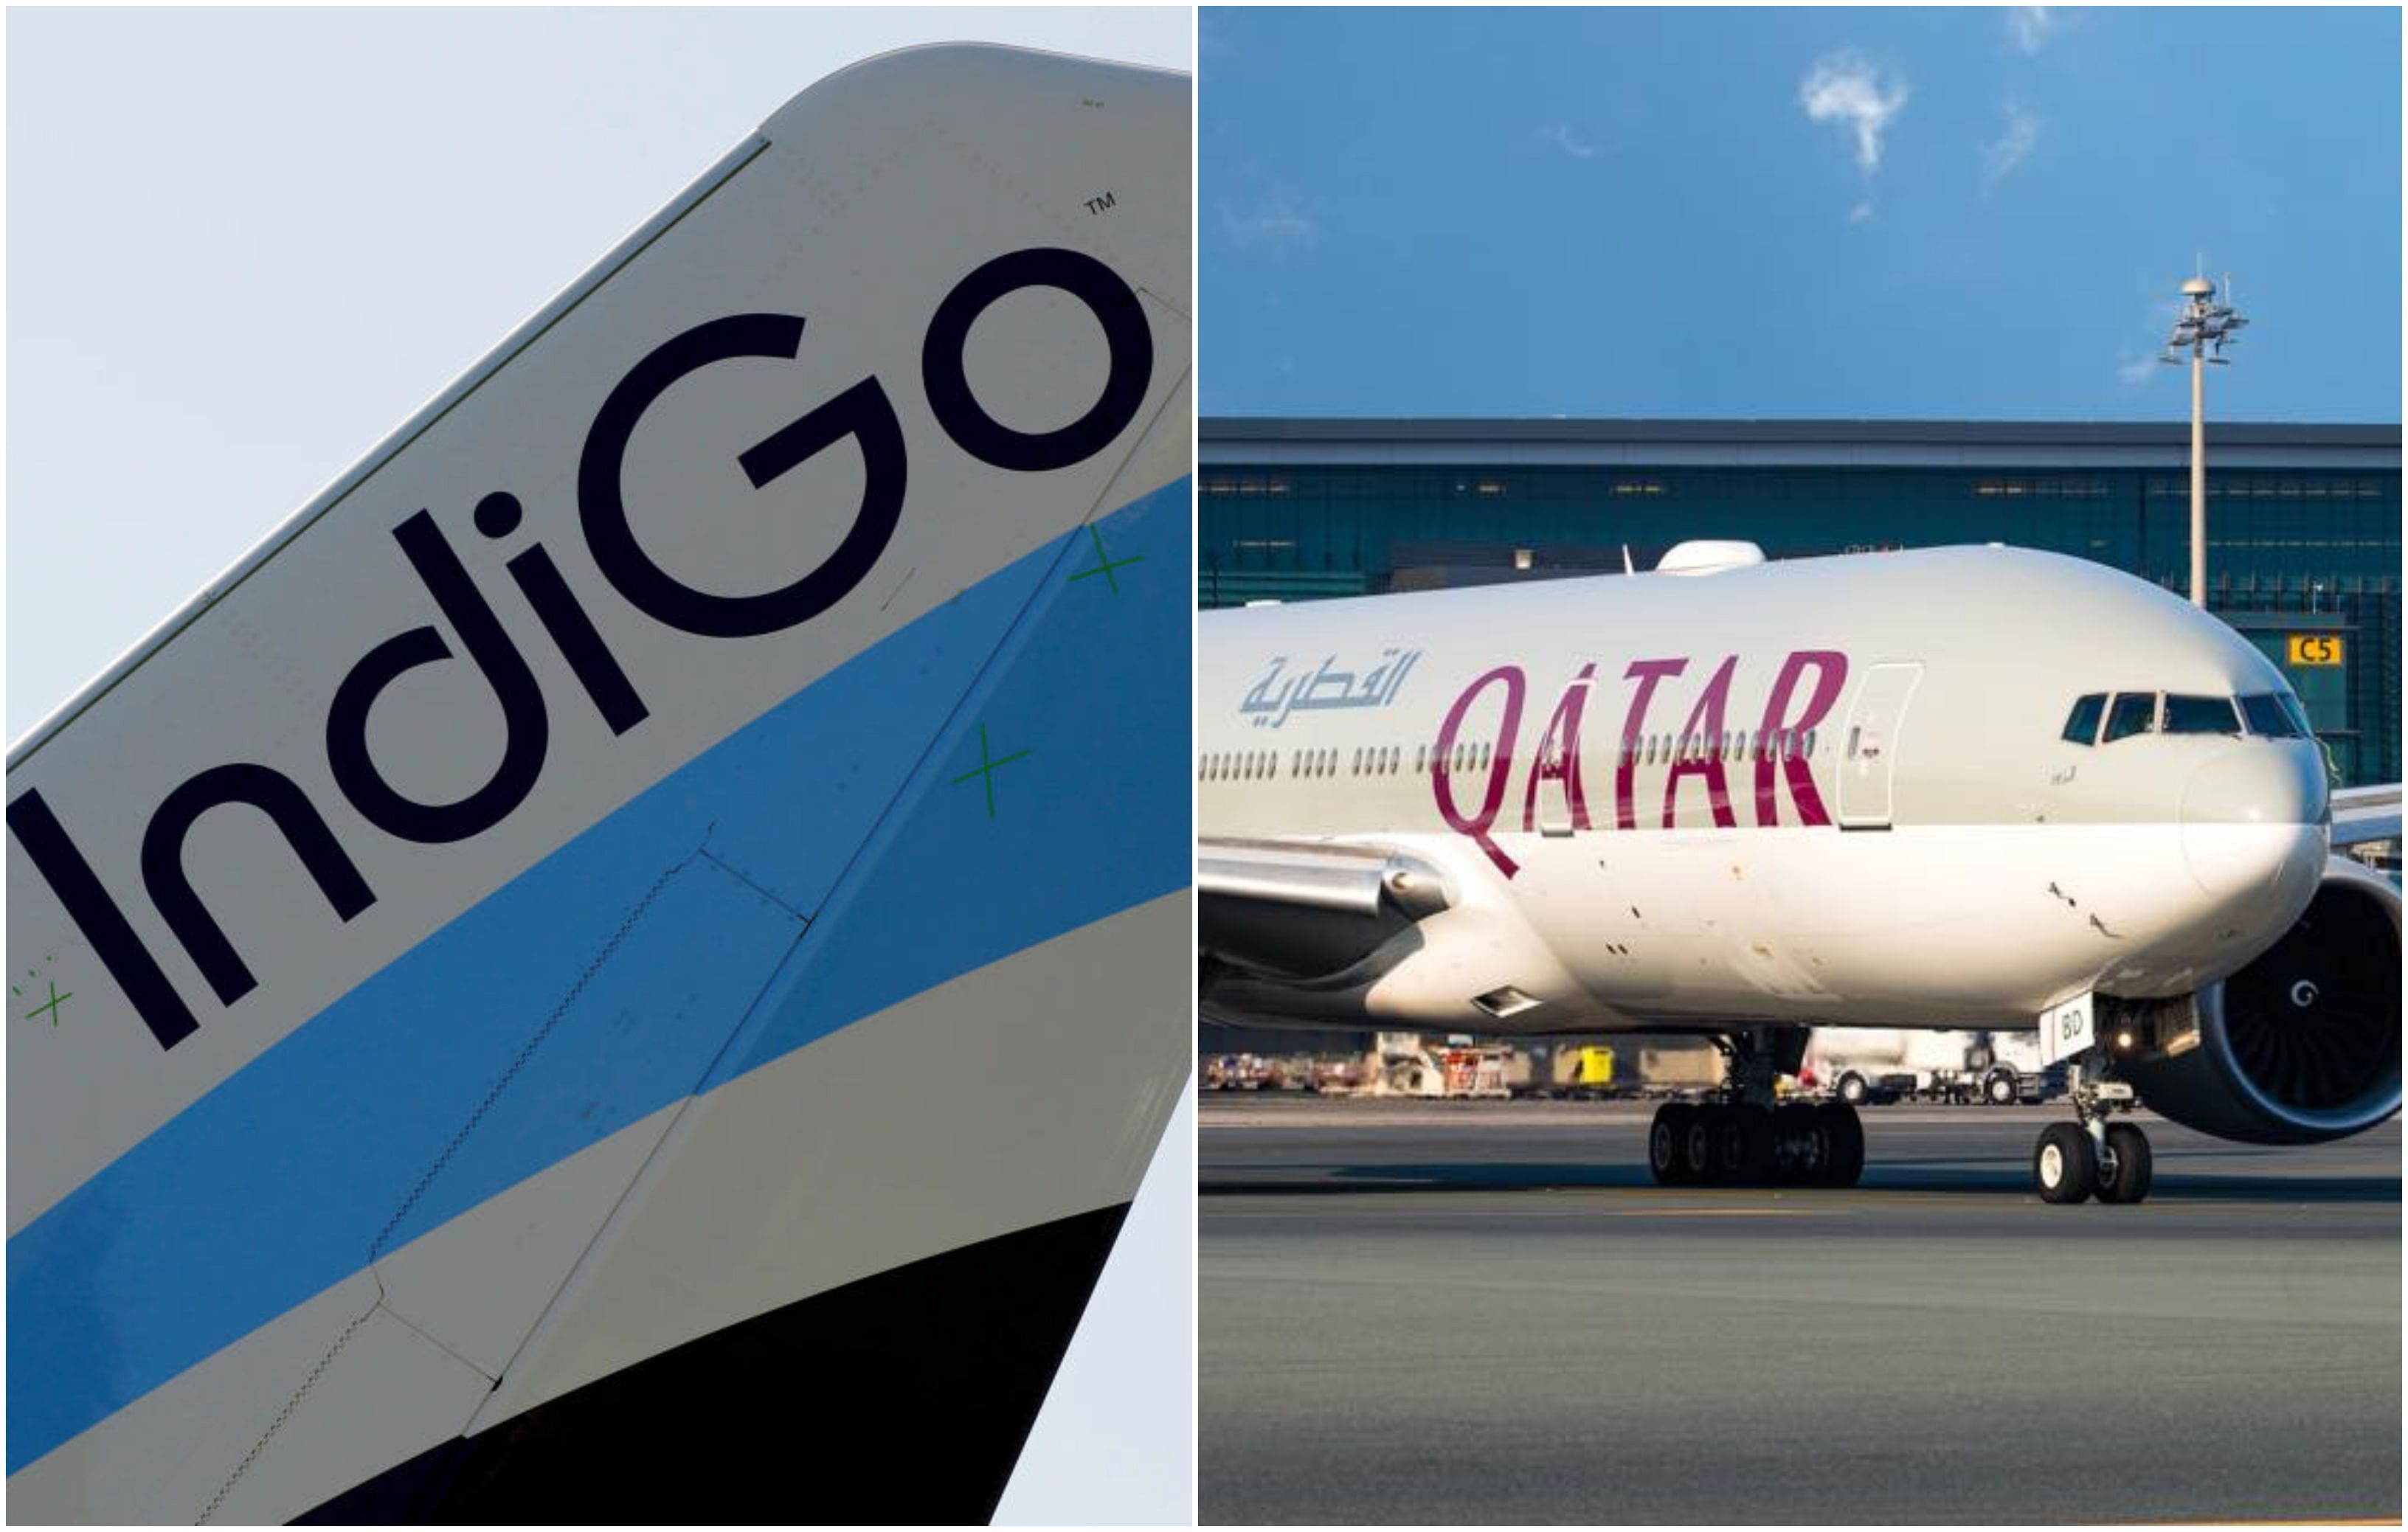 Qatar has in the past shown interest in investing in IndiGo but the Indian budget carrier has resisted.